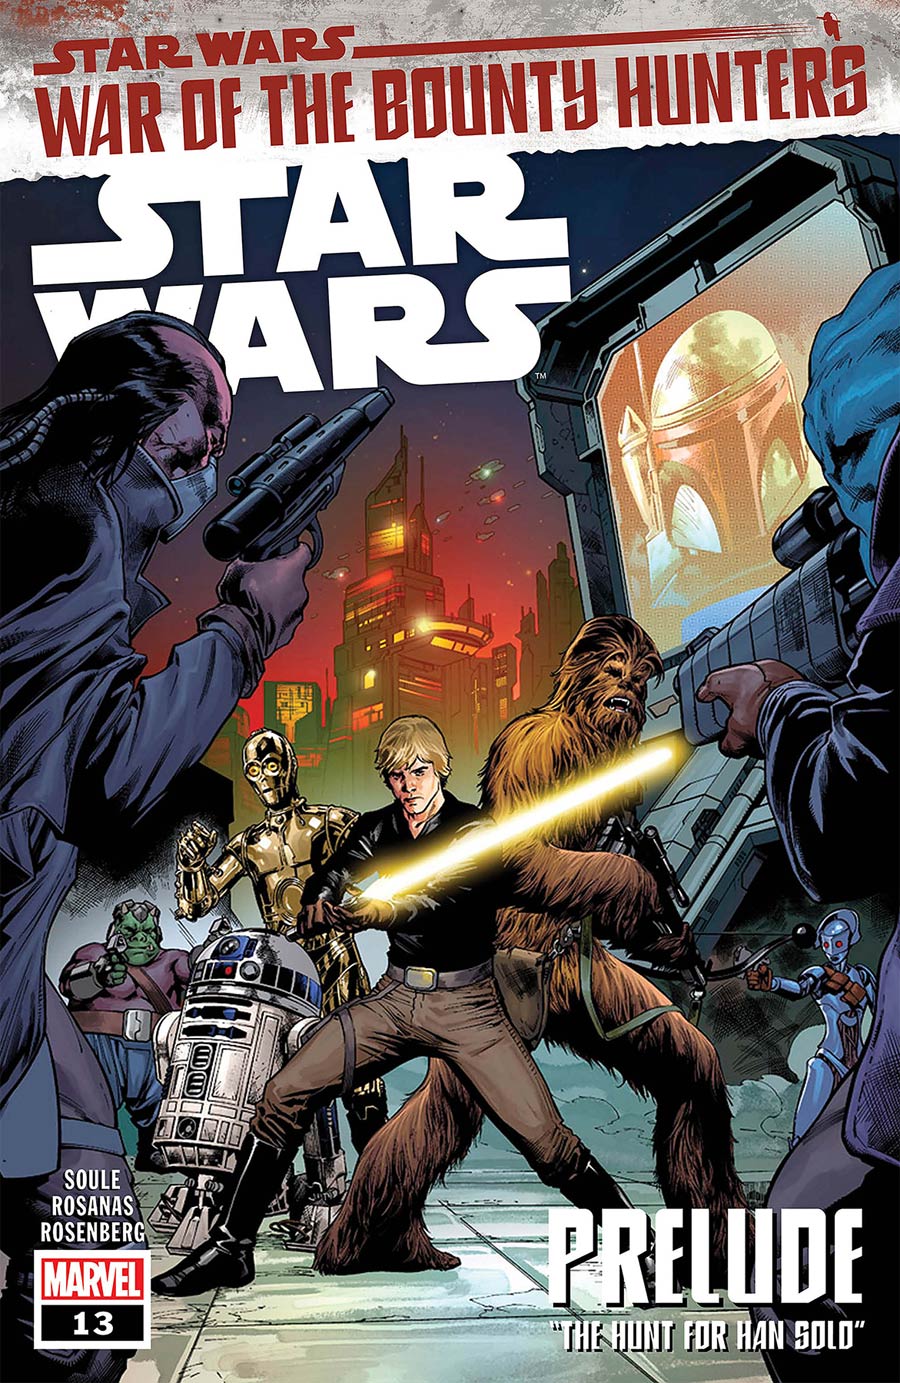 Star Wars Vol 5 #13 Cover F DF Signed By Charles Soule